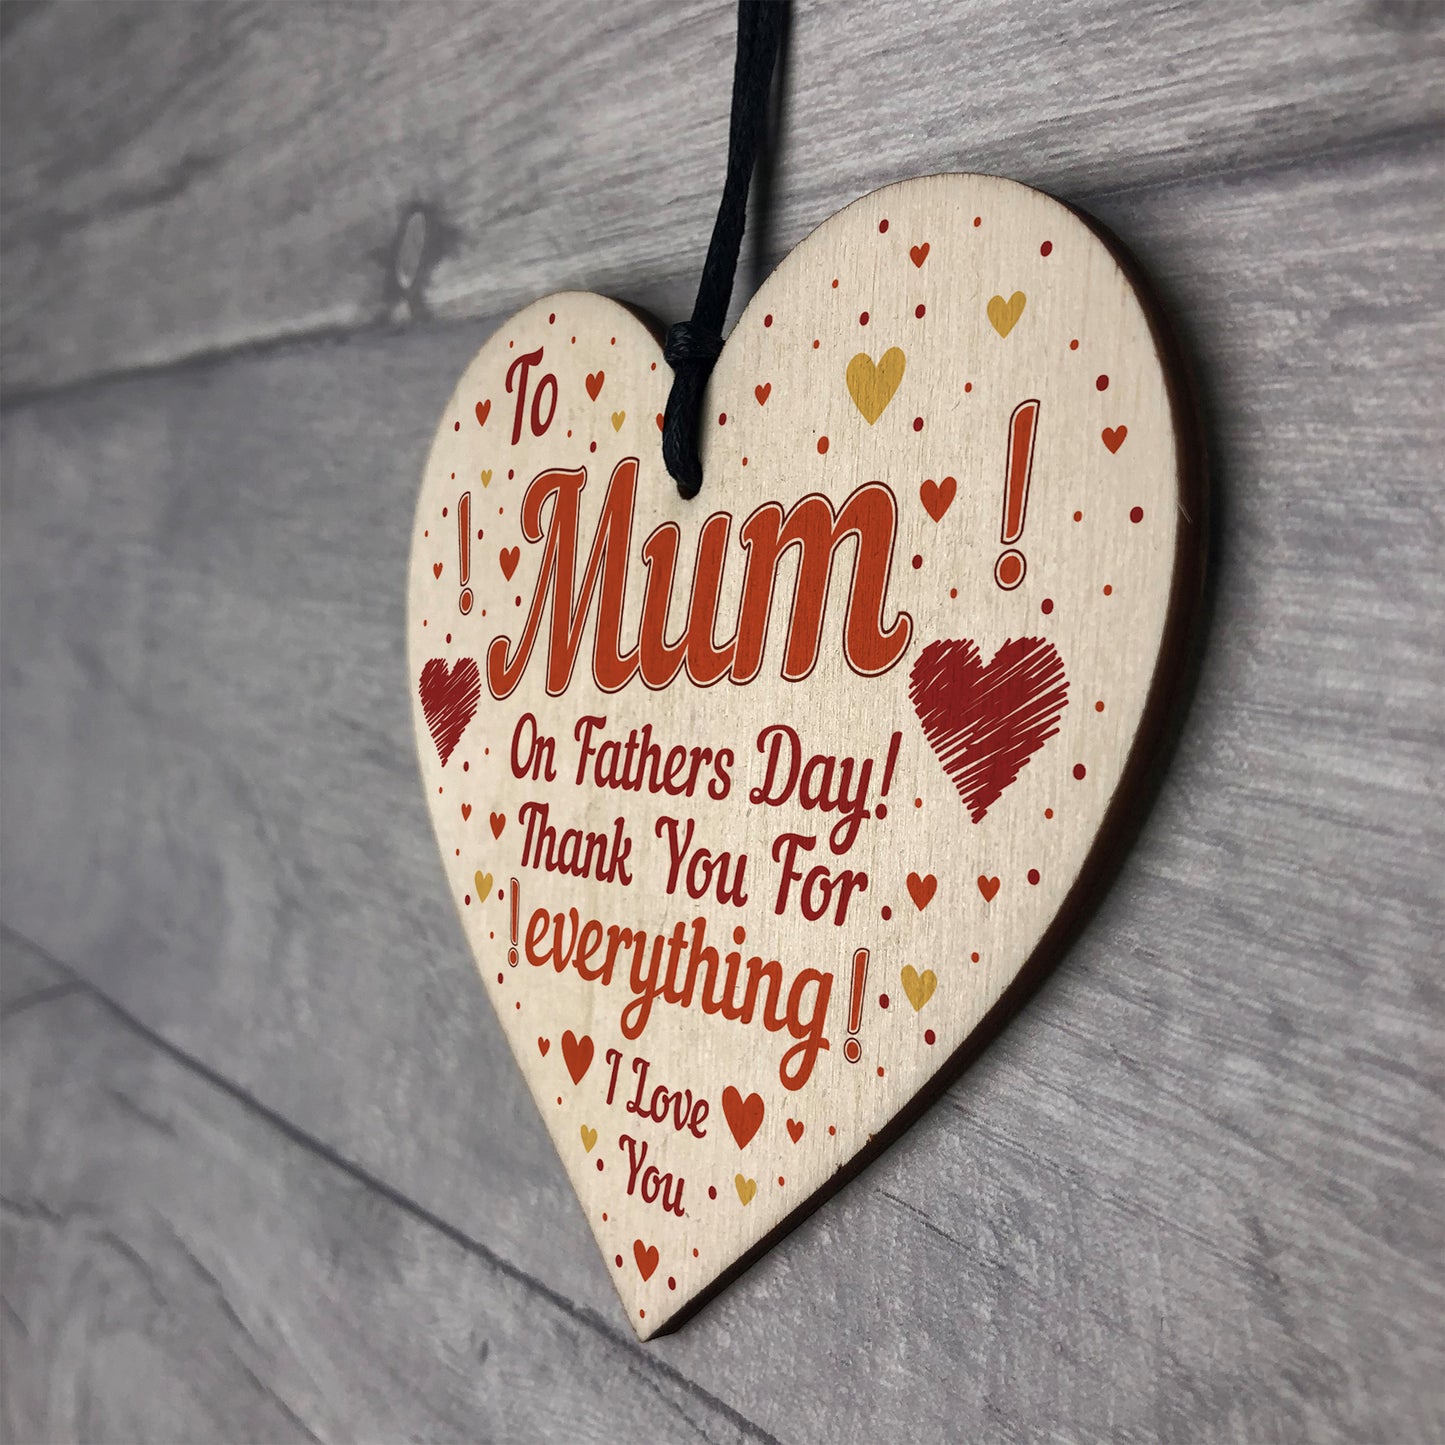 Fathers Day Card For Mum Novelty Wooden Heart Gift For Mum